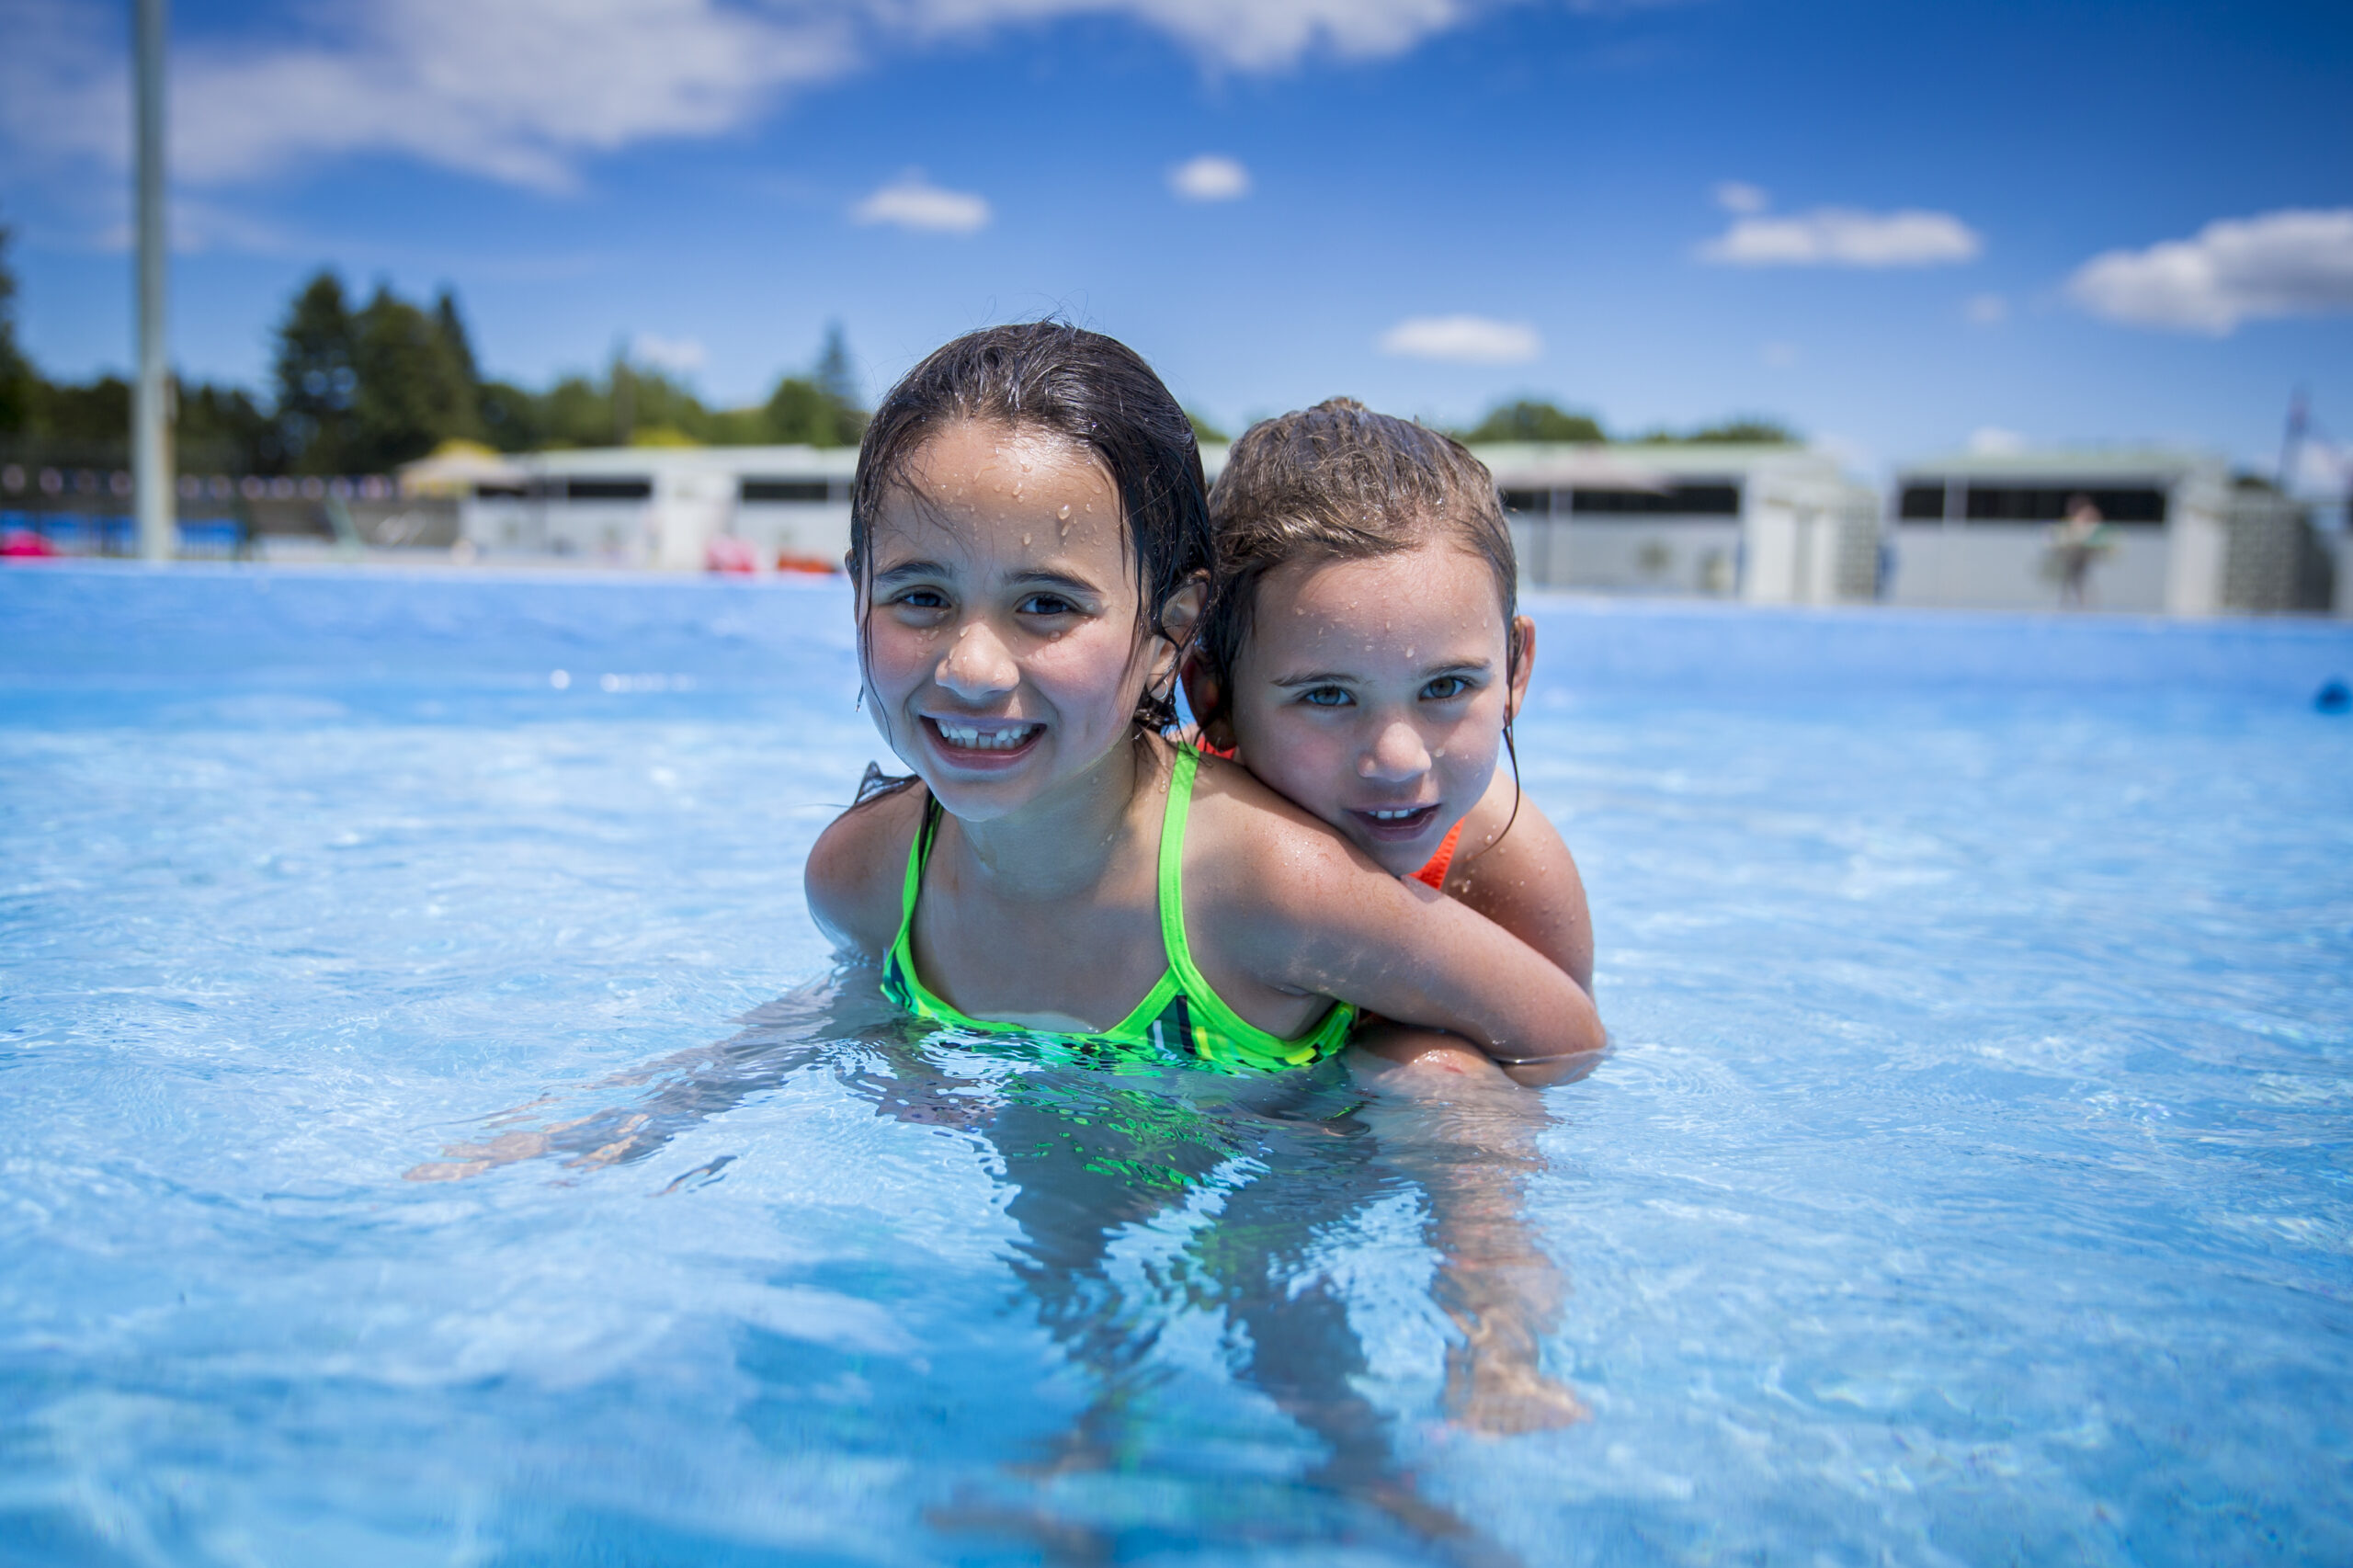 Two young girls in a swimming pool.